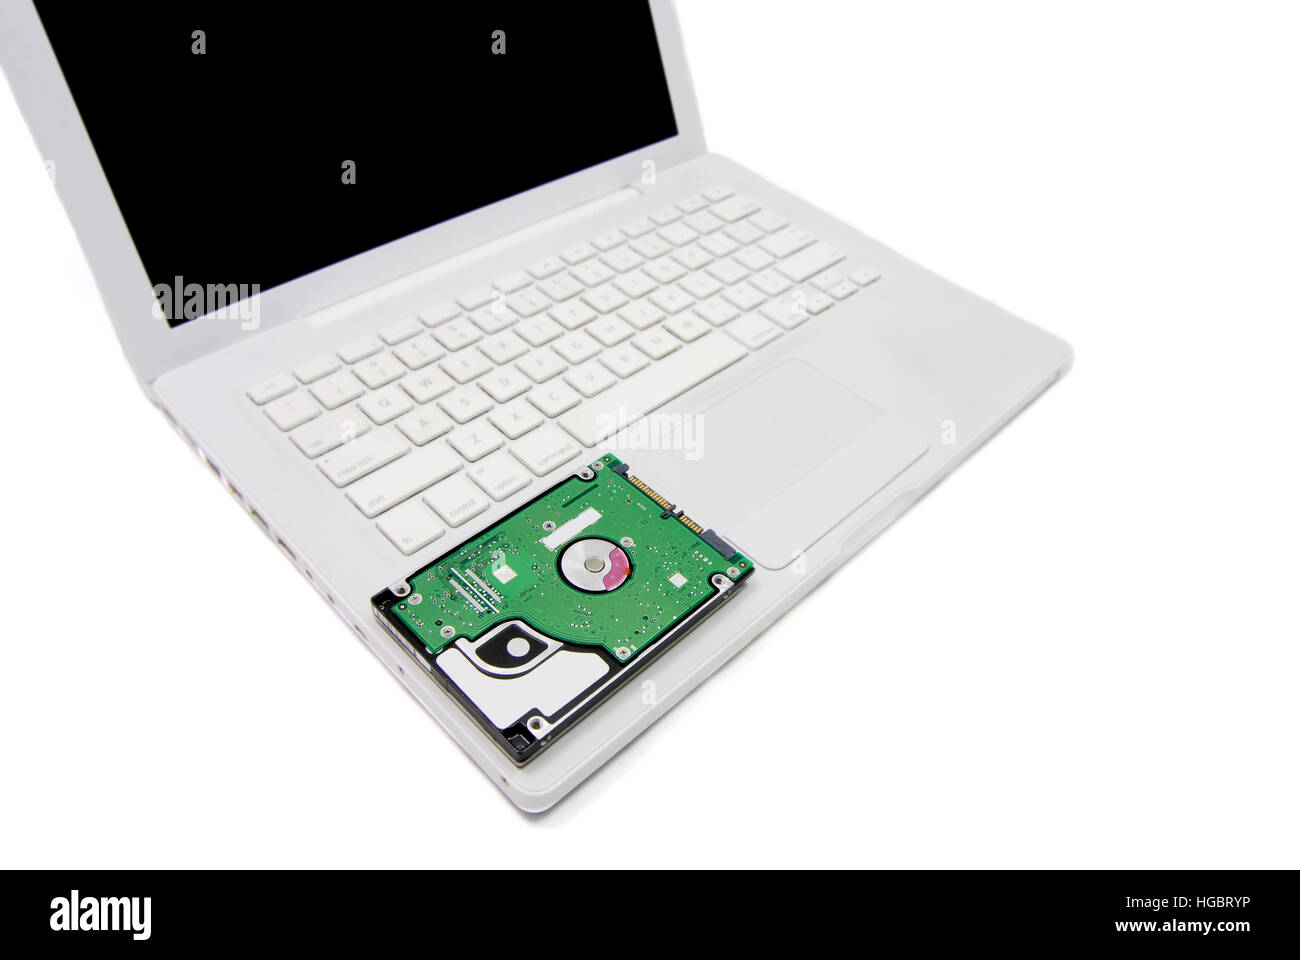 Laptop computer with an exposed internal harddrive. White background. Stock Photo